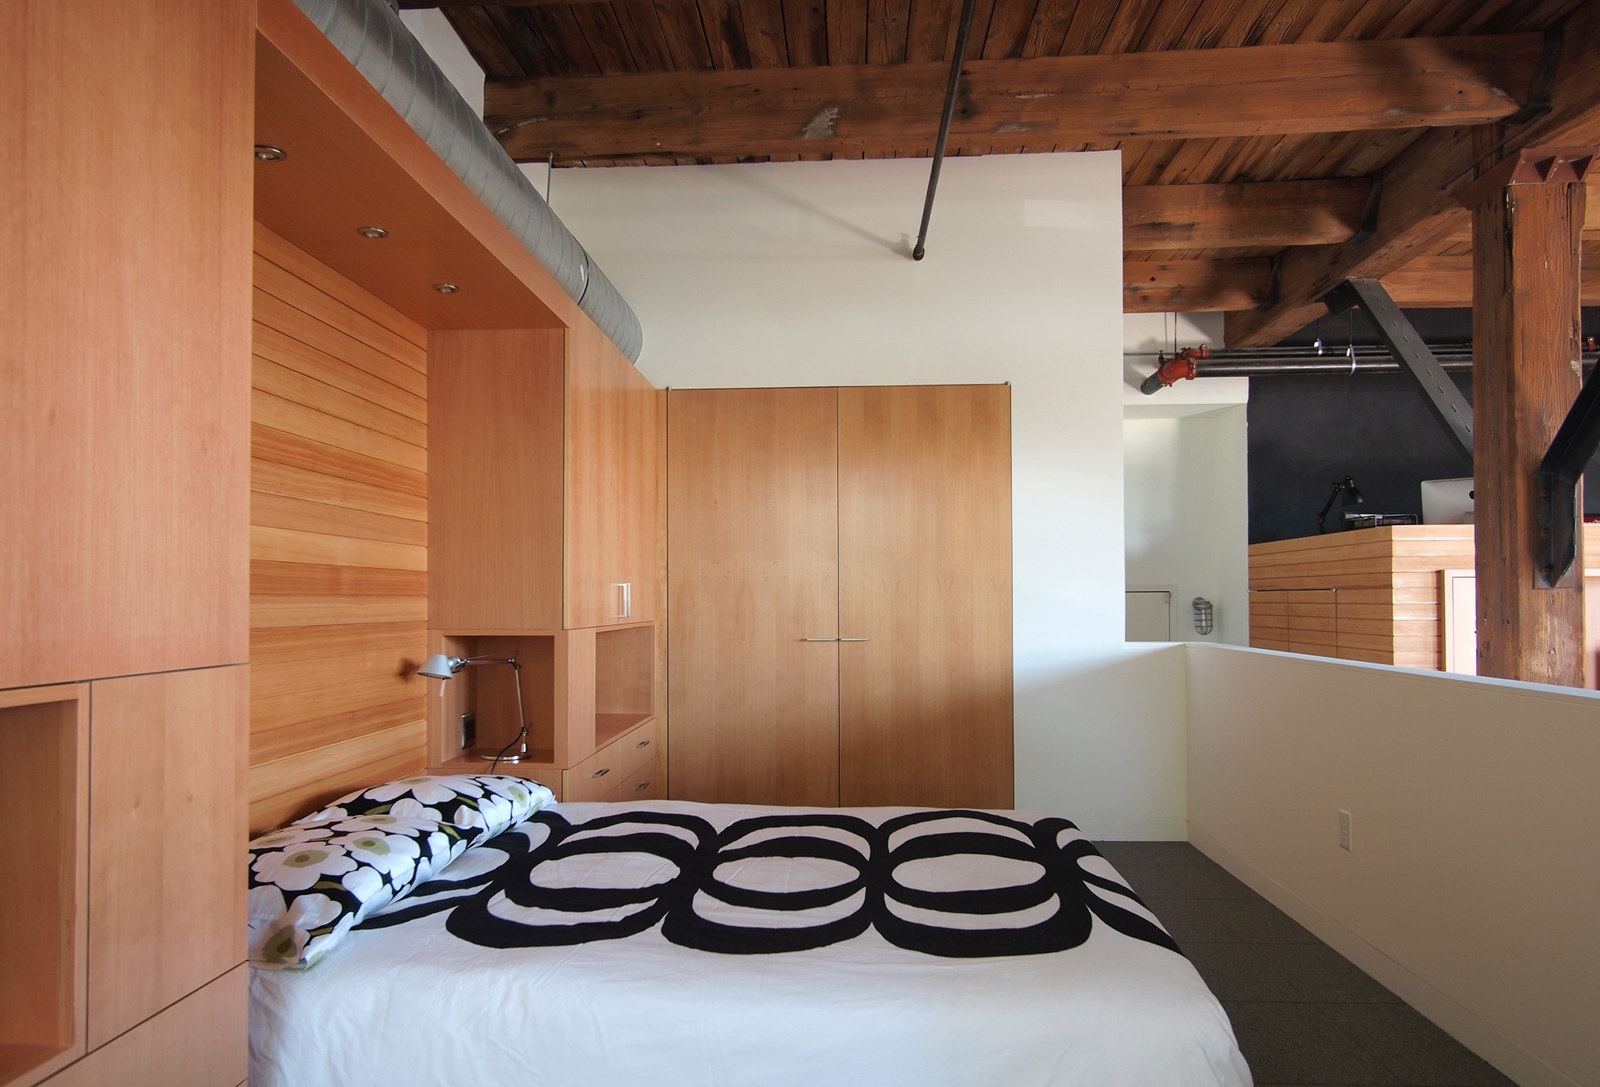 Loft renovation, with open bedroom loft and custom built-in cabinetry around bed.